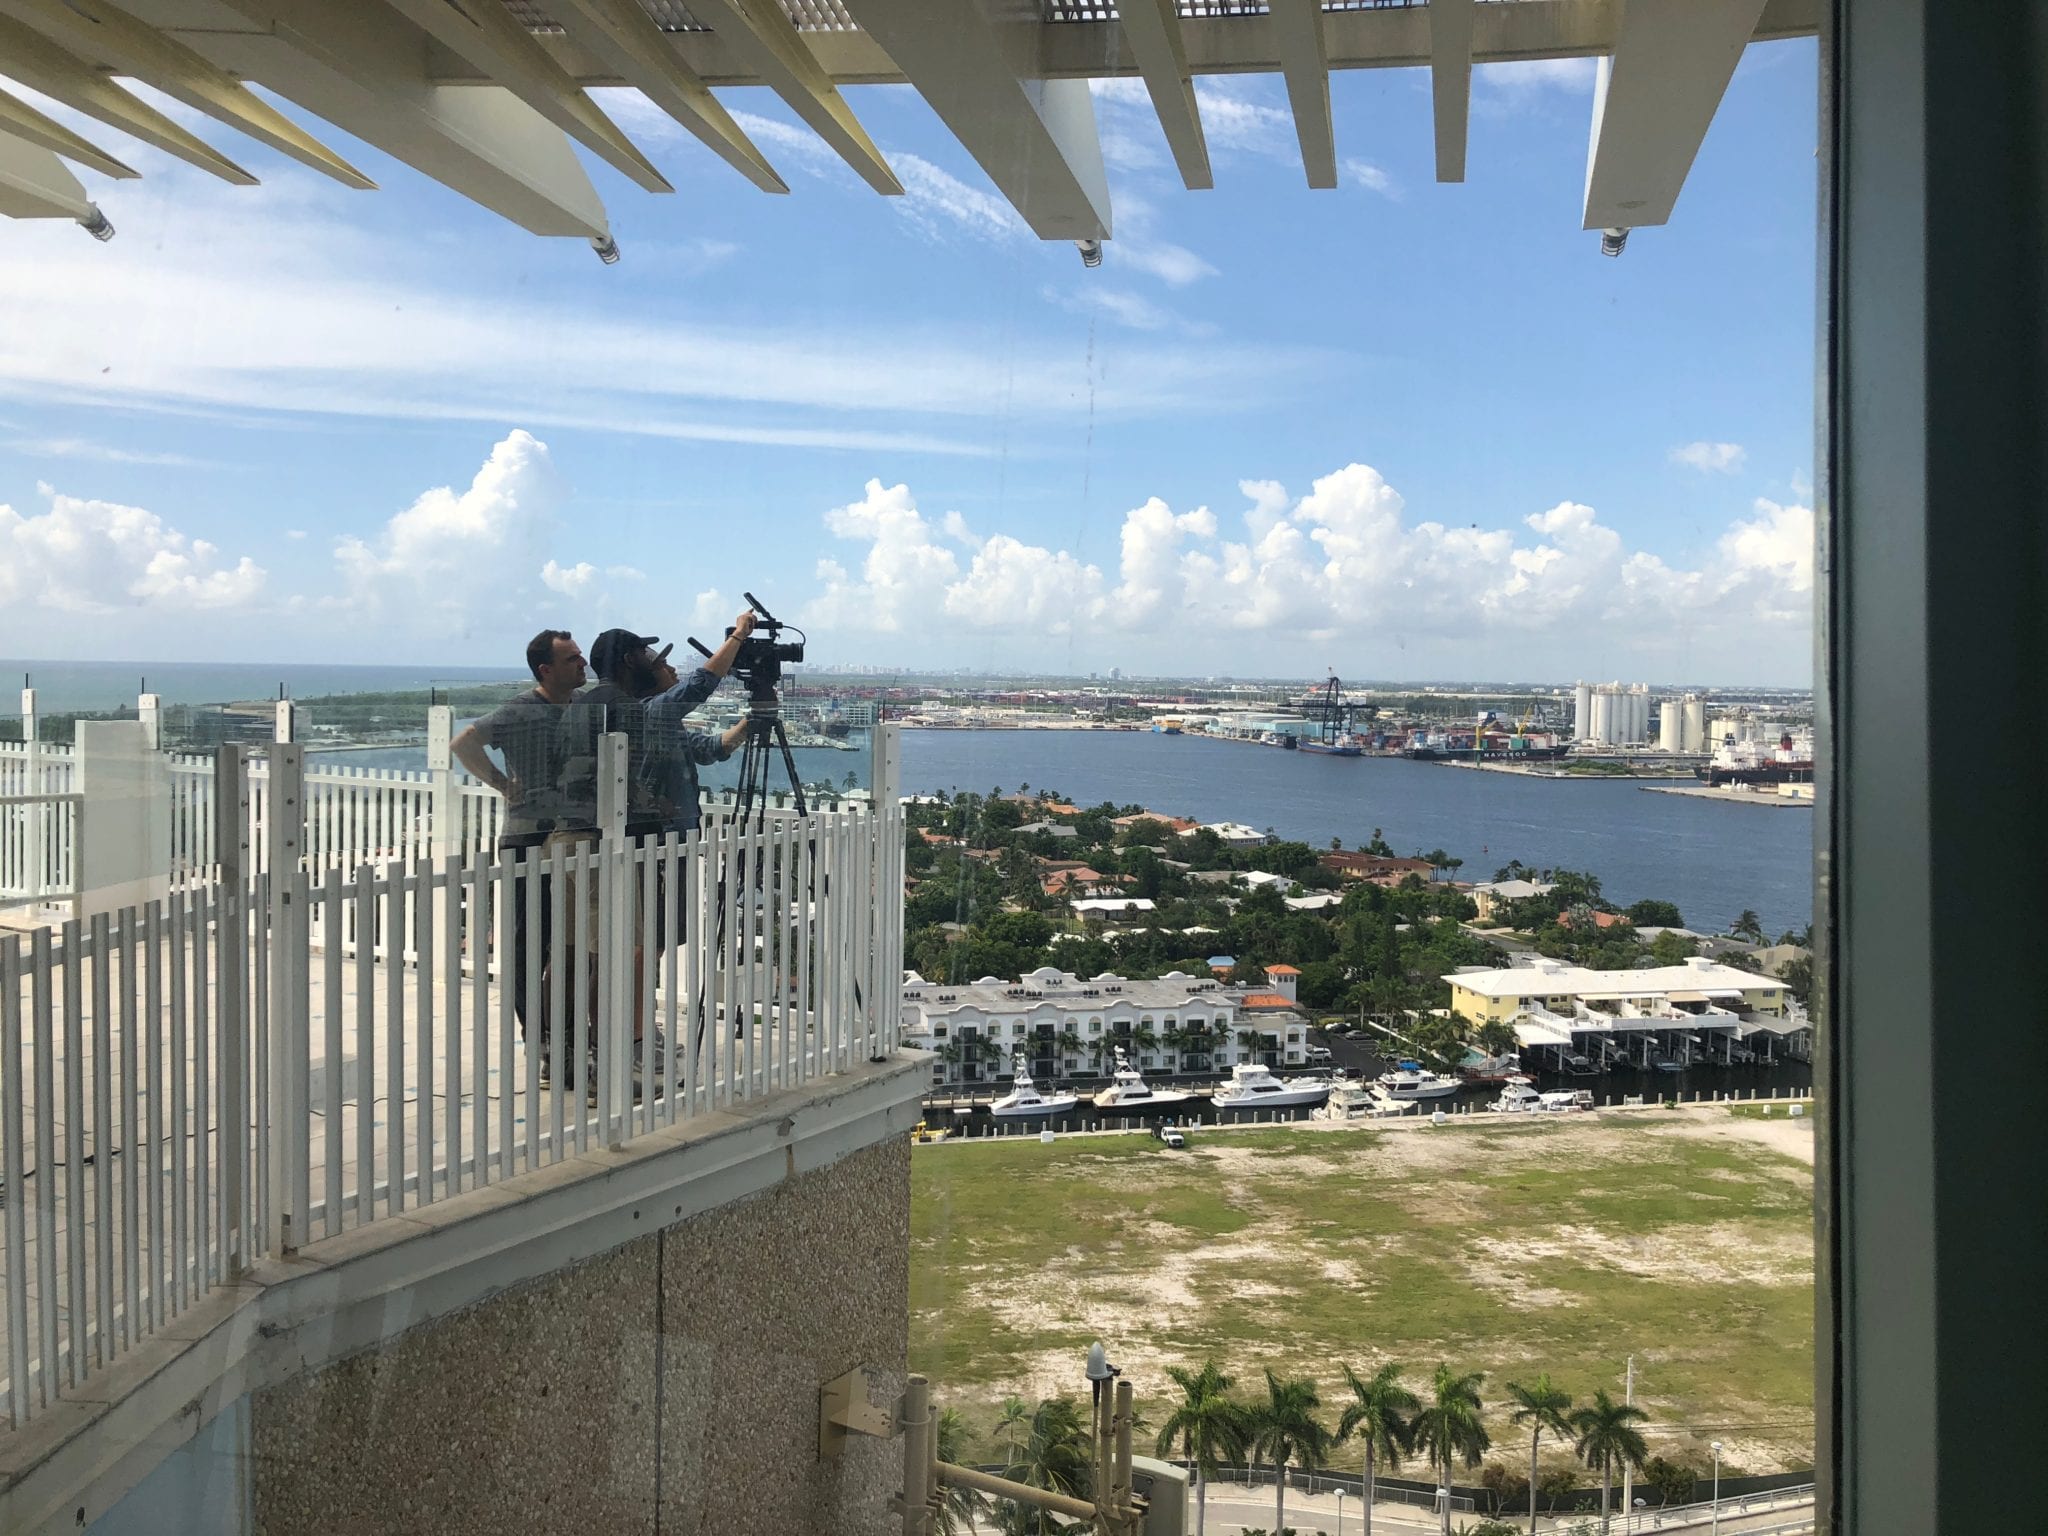 Go Pro Video cameraman setting up equipment on a platform overlooking the city and yacht club